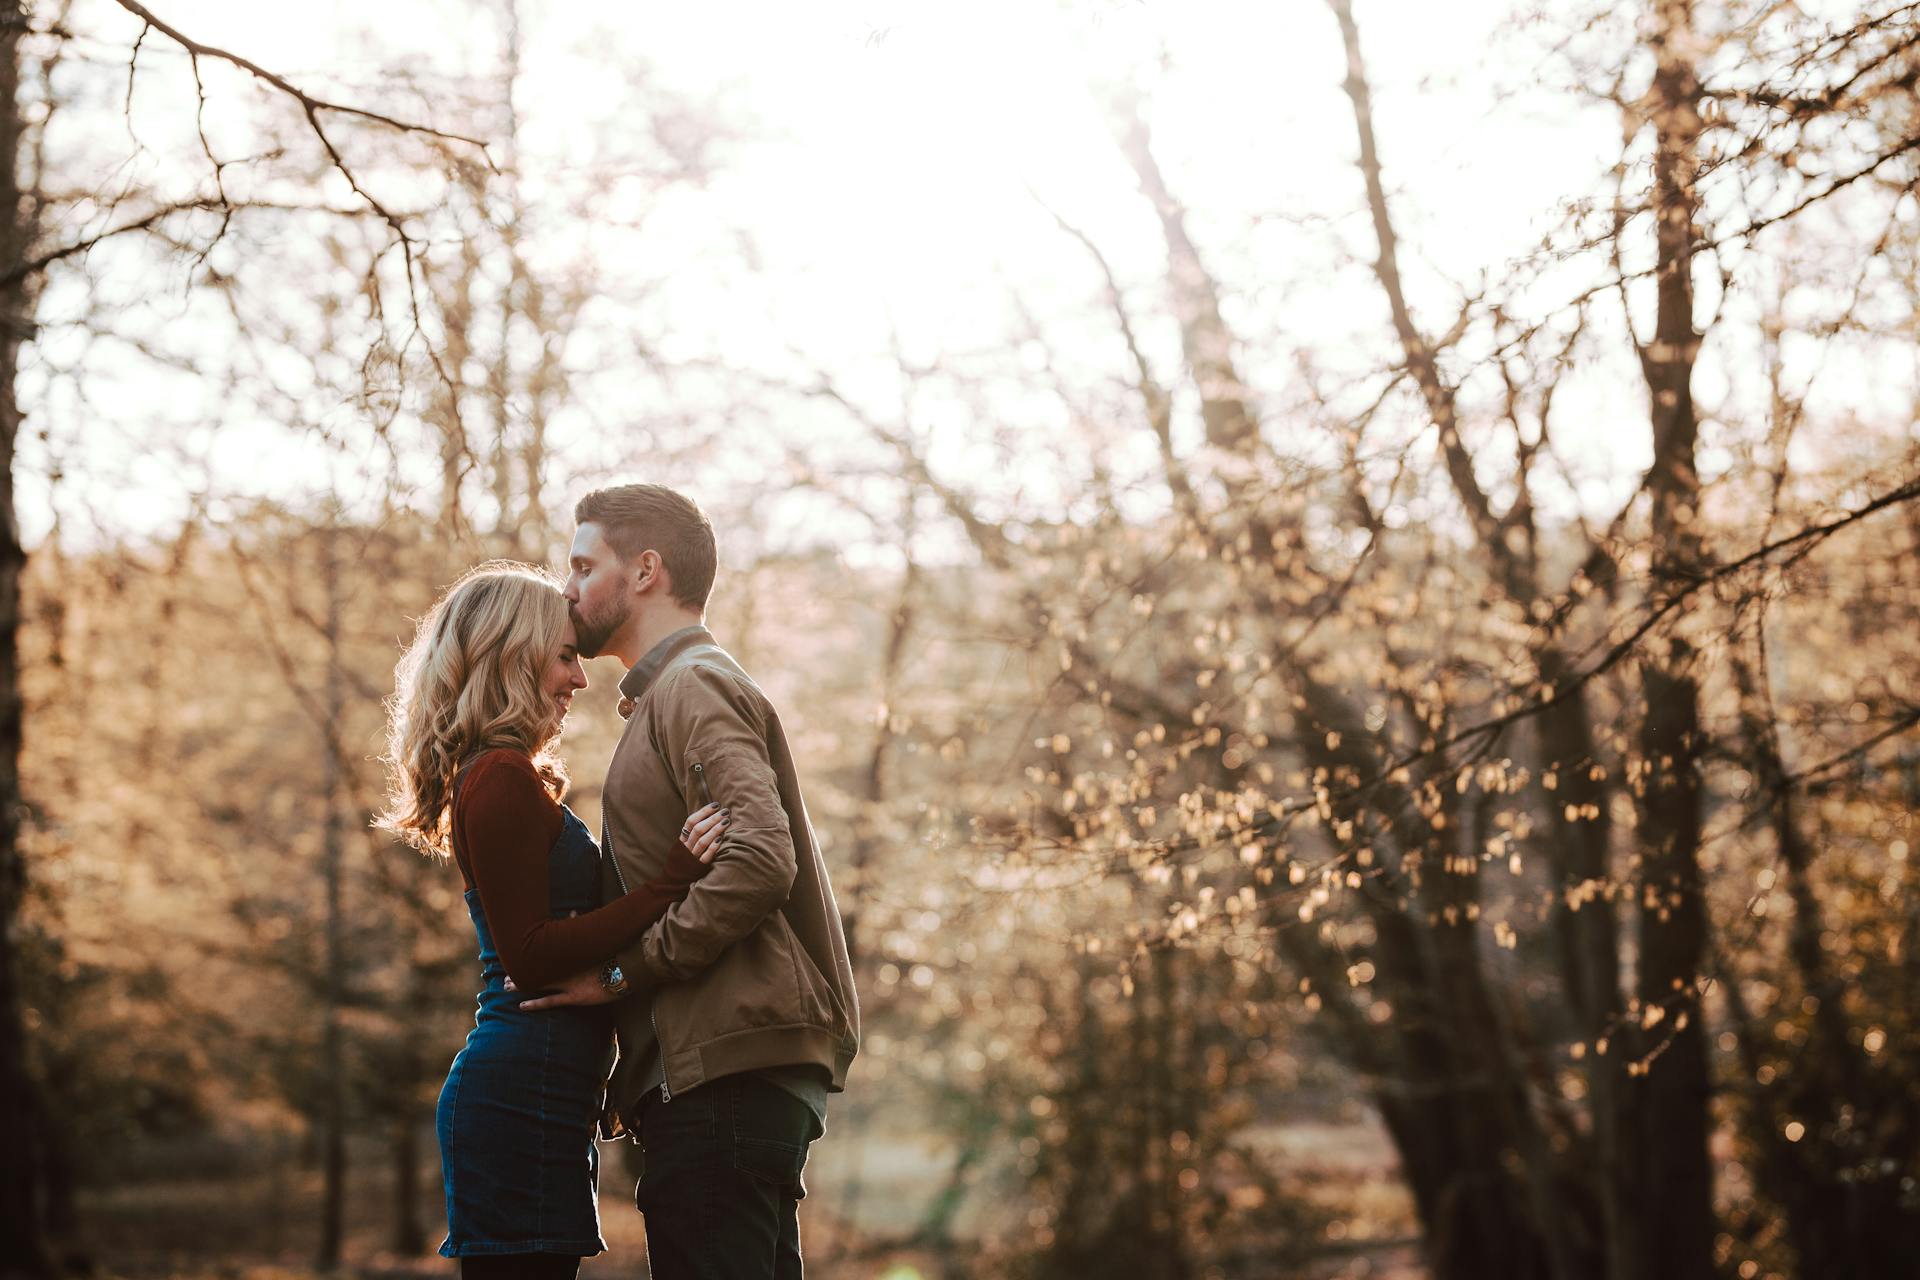 A man kissing his girlfriend on the forehead | Source: Pexels